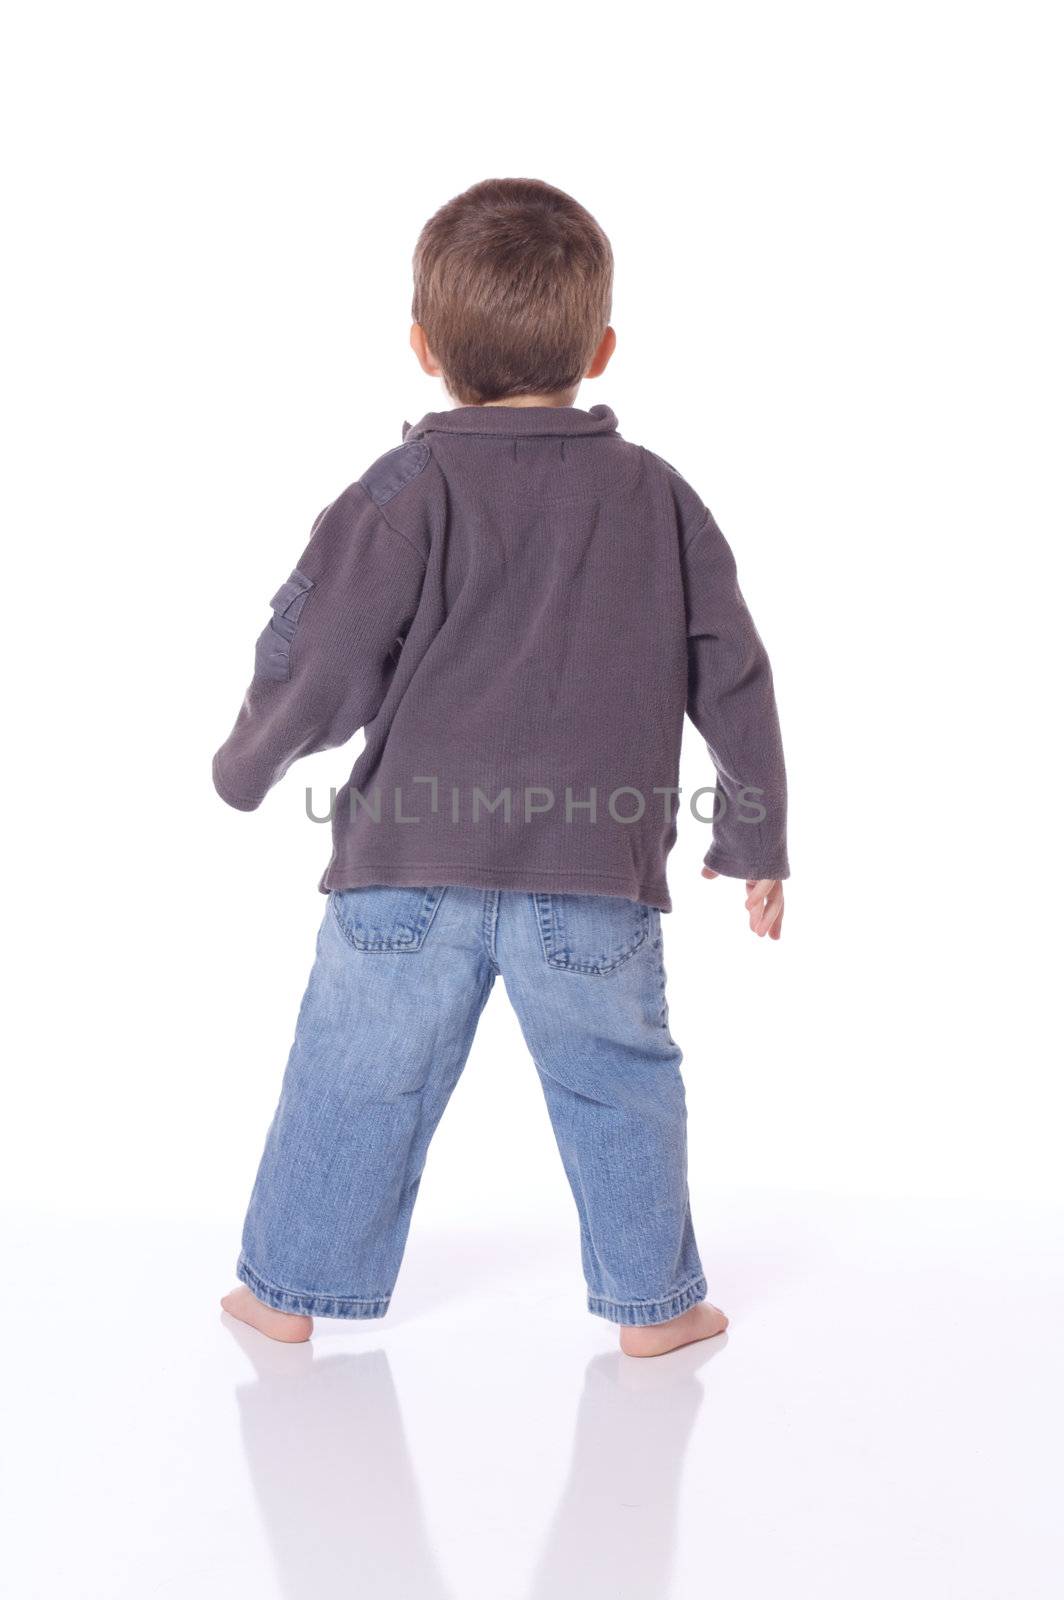 Cute little boy dancing and playing